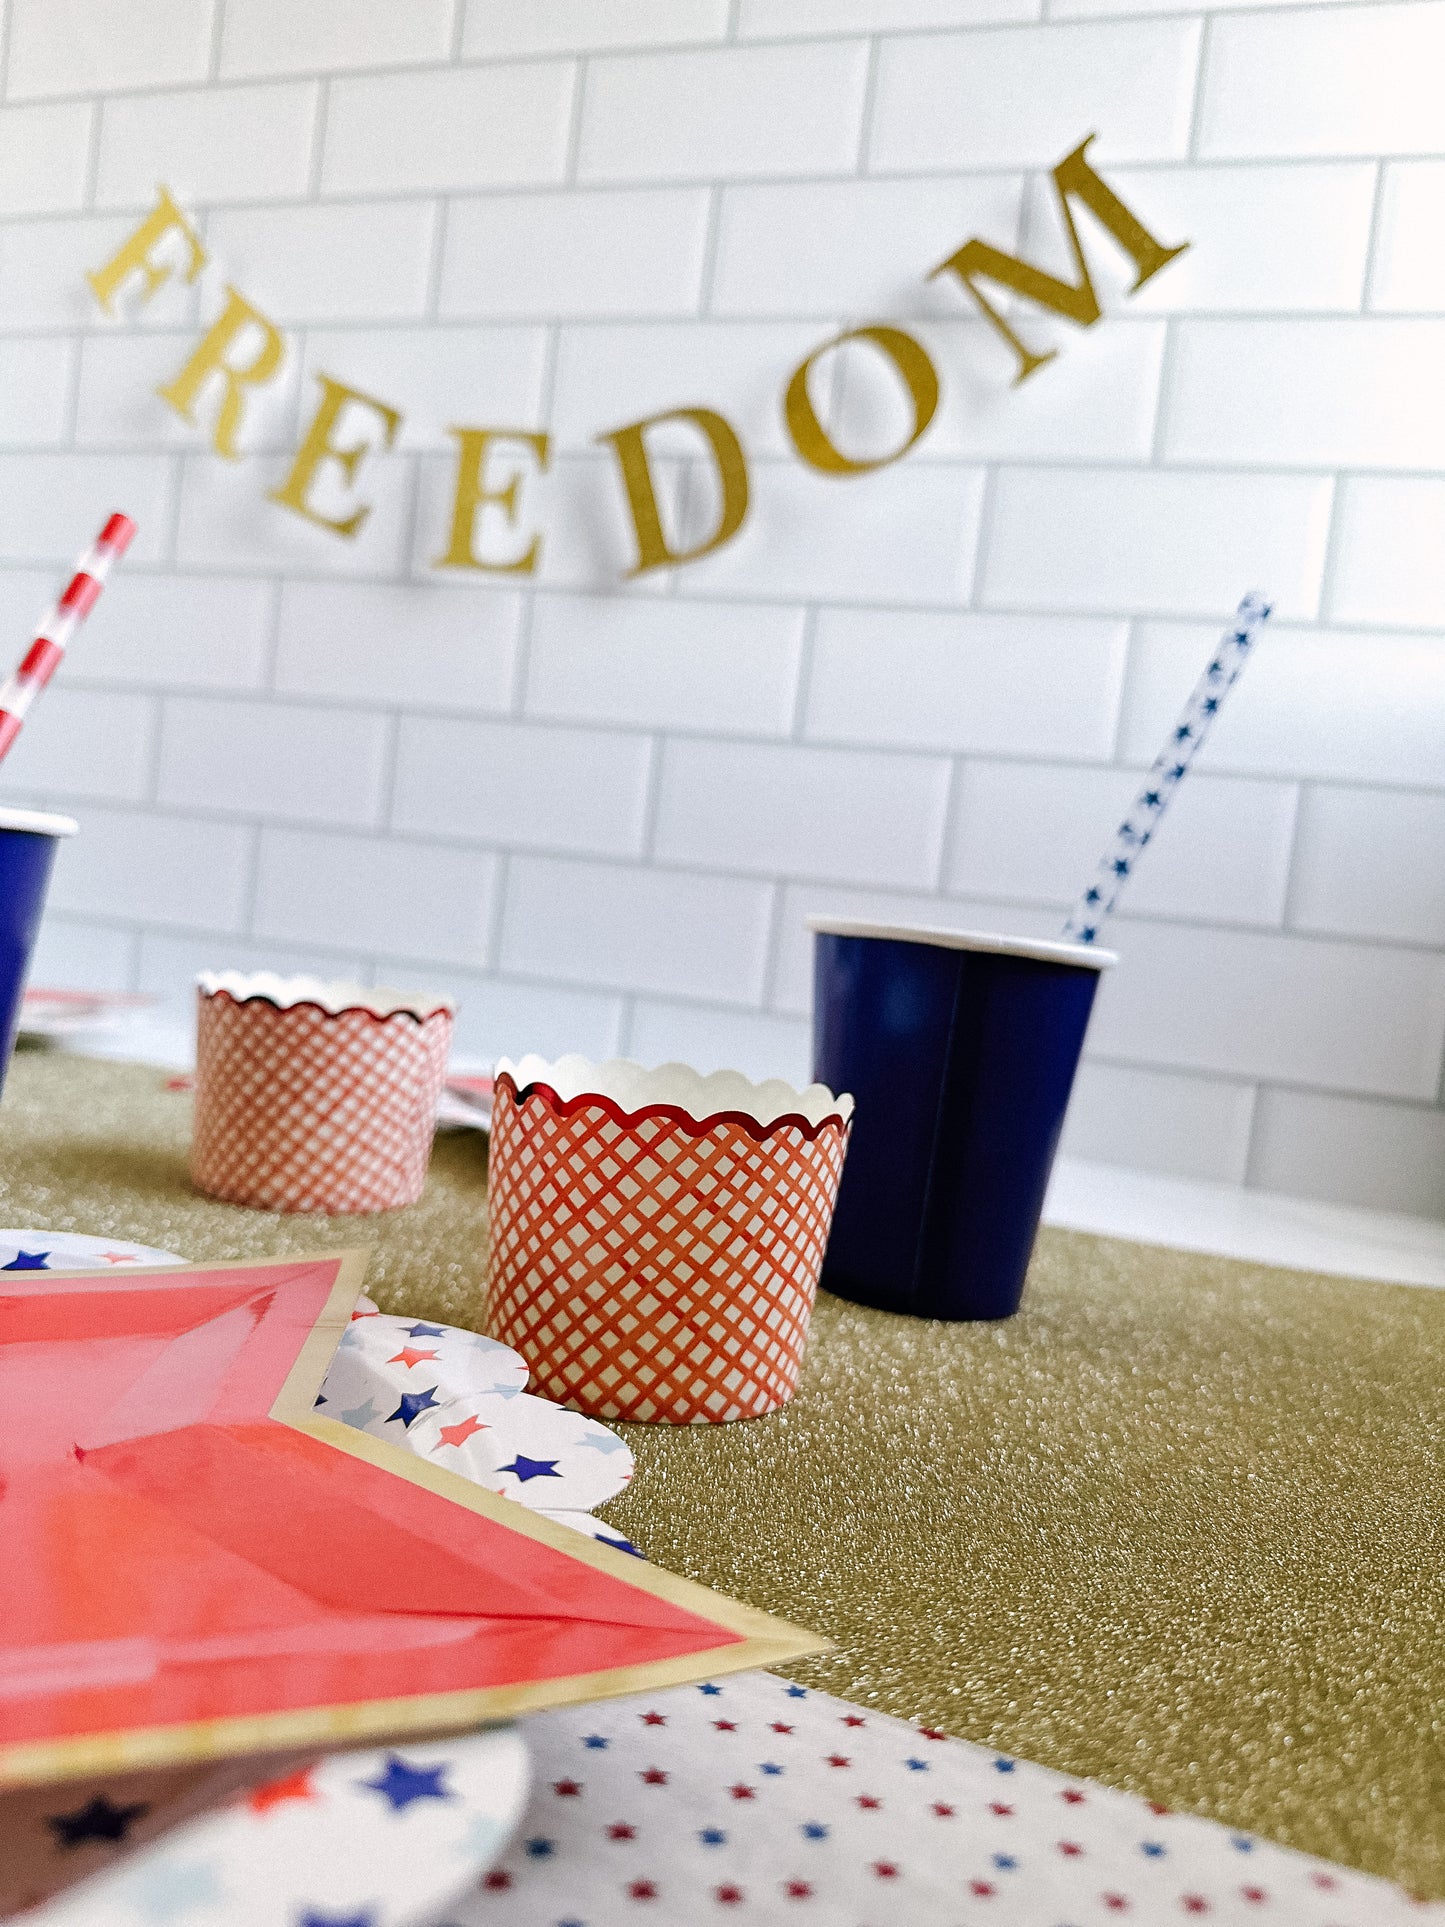 Star Spangled Party Box | 4th of July Themed Party Box